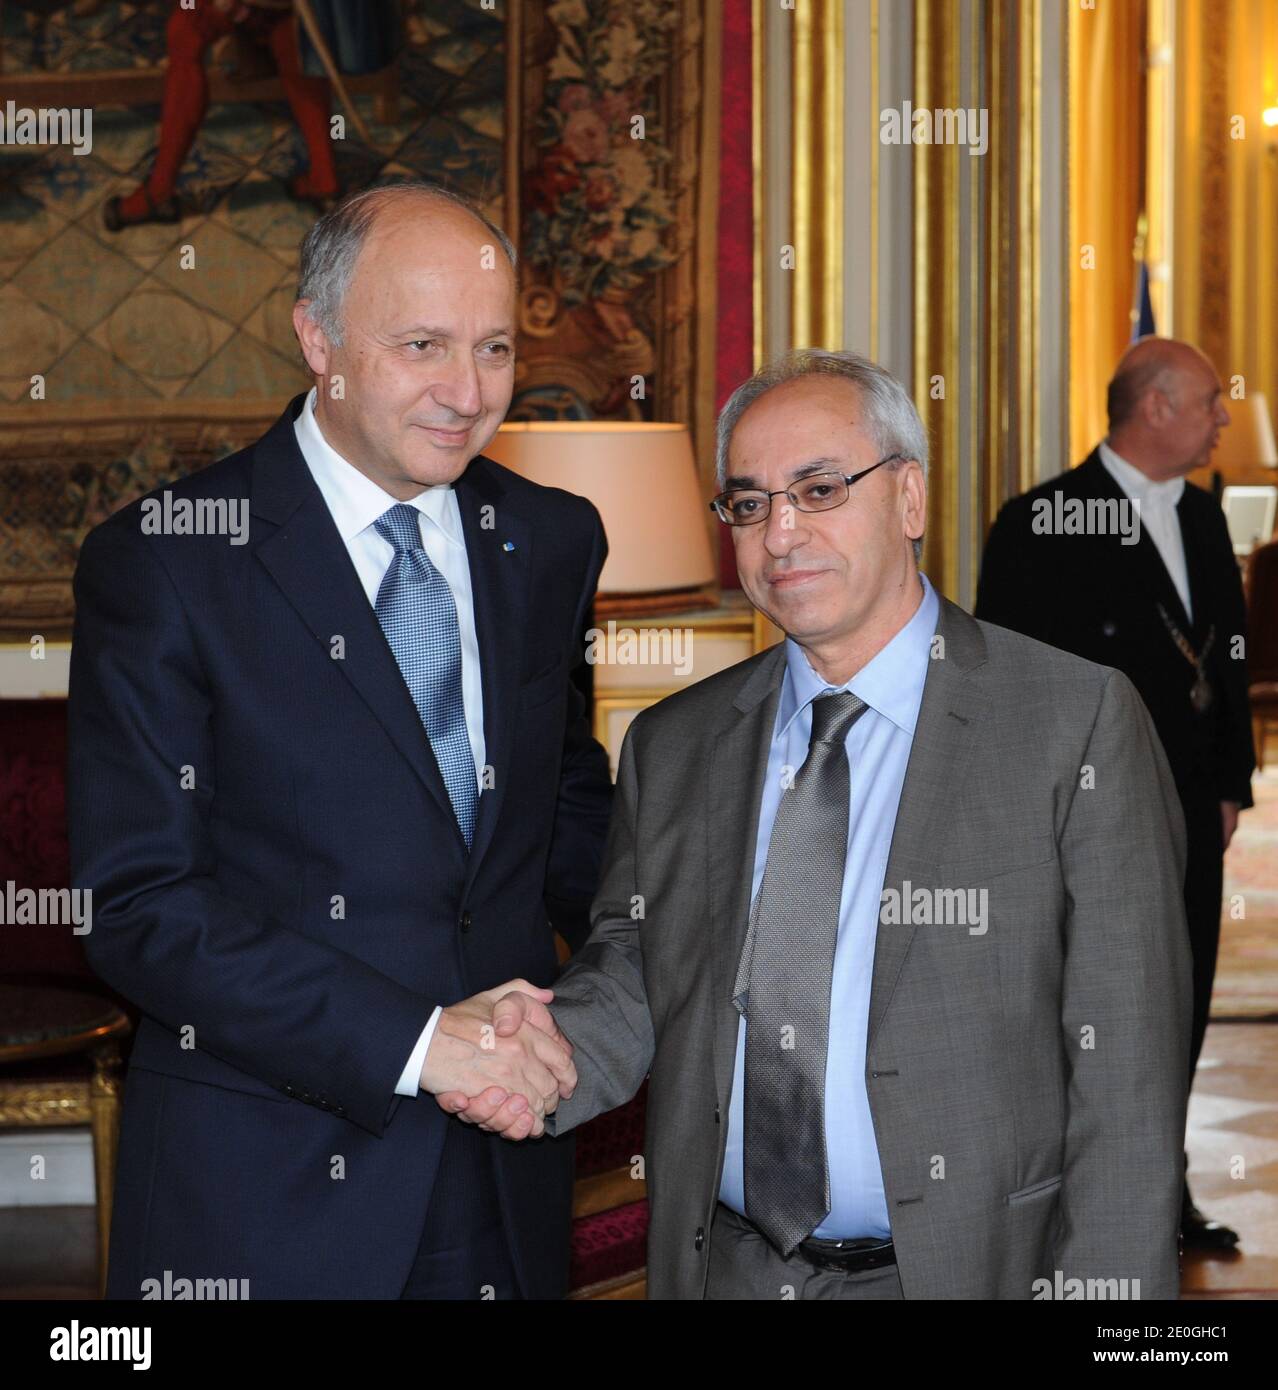 French Foreing Affairs Minister Laurent Fabius (left) receives new president of Syrian National Council Abdel Basset Sayda at the Ministry's headquarters, at Quai d'Orsay, in Paris, France on June 29, 2012. Photo by Ammar Abd Rabbo/ABACAPRESS.COM Stock Photo